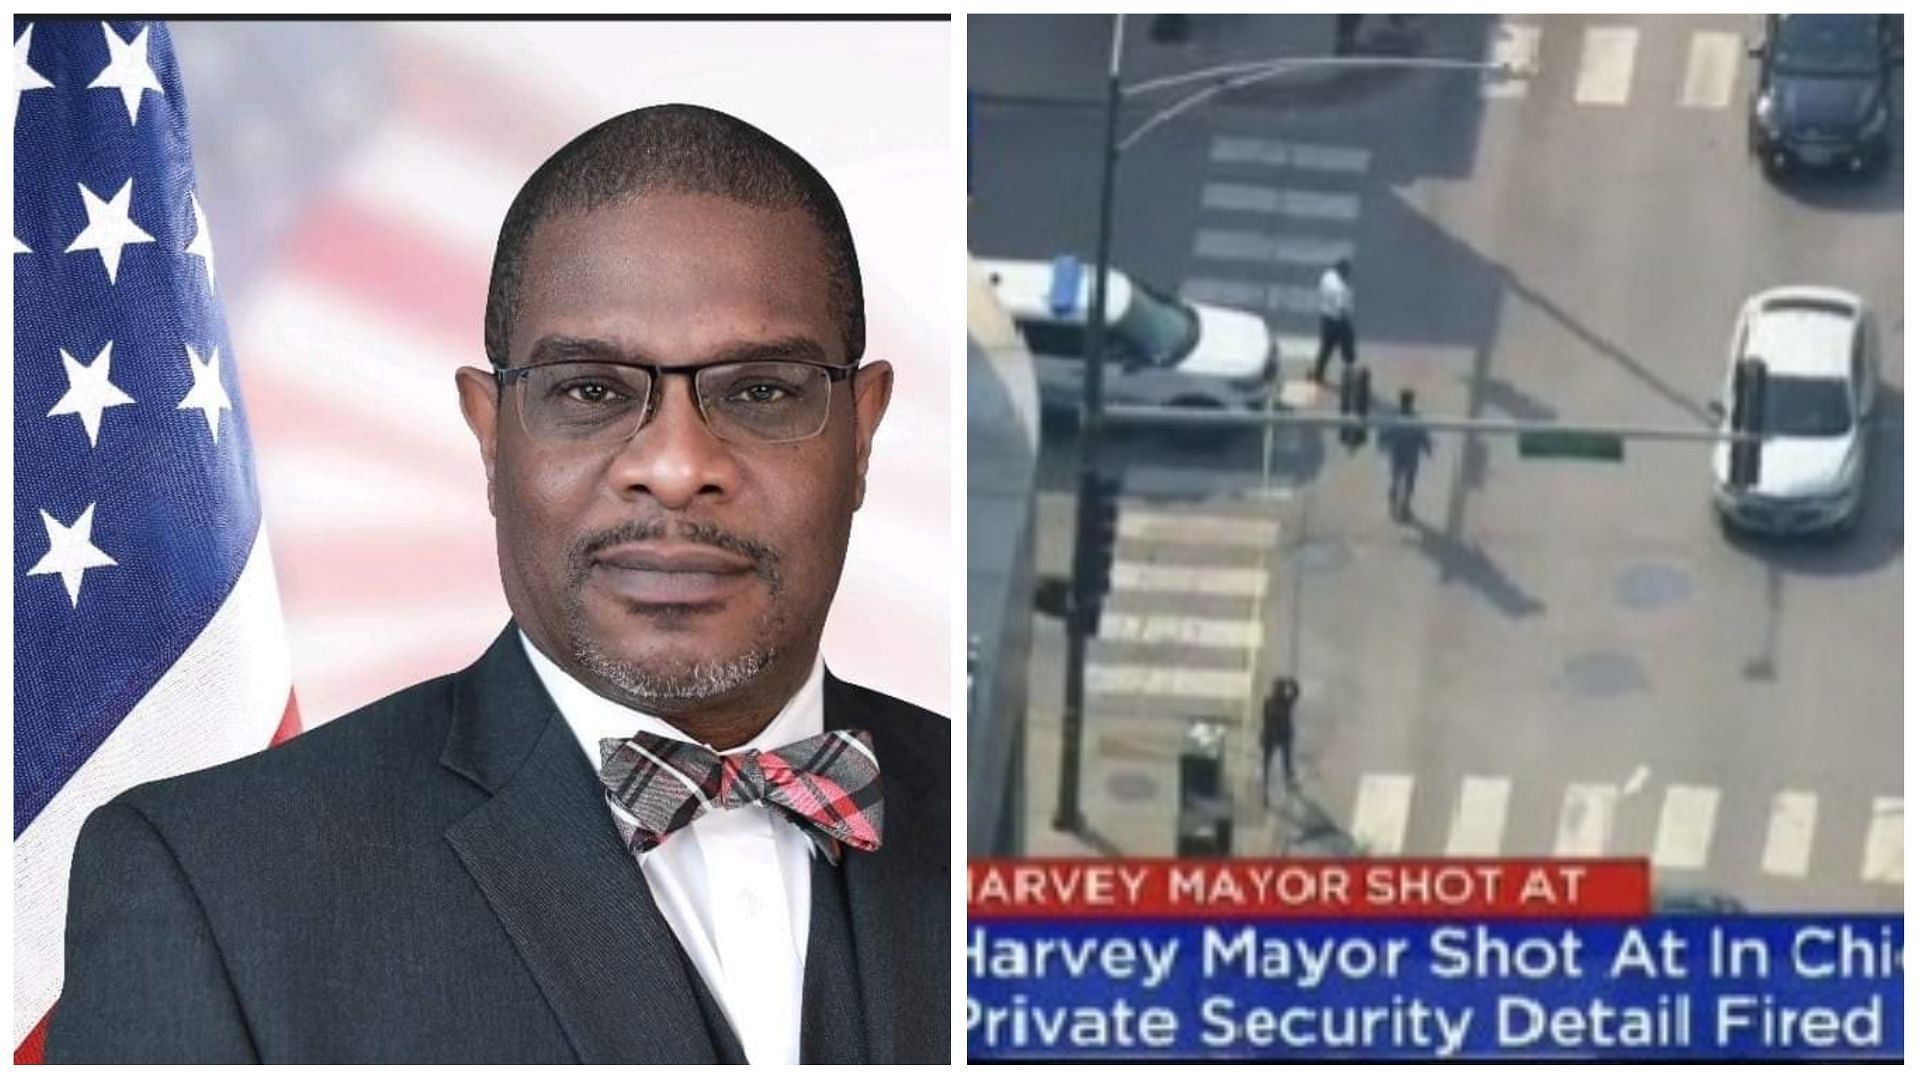 Harvey mayor&rsquo;s security guards shoots robbery suspect outside Chicago Apple Store (Image via Facebook/ChristopherClark/Twitter/JermontTerry)